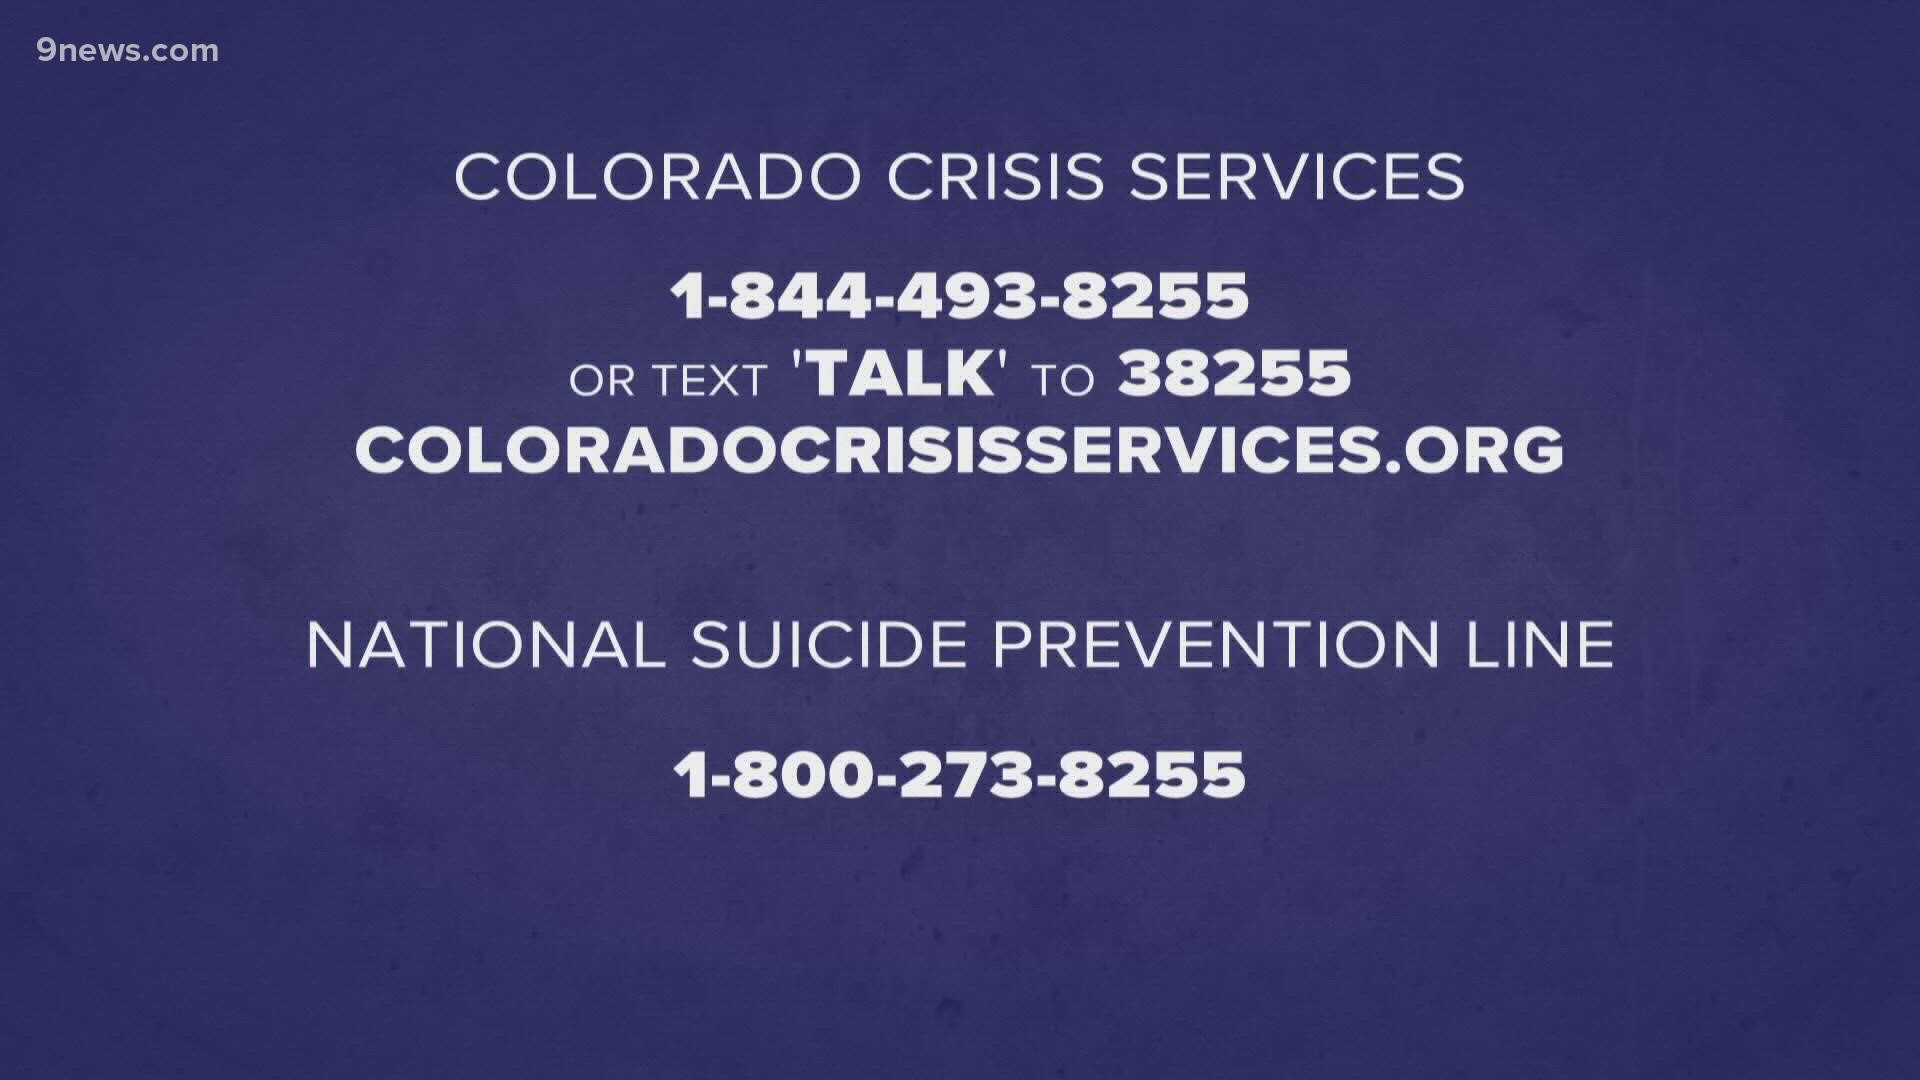 The Mental Health Center of Denver launched its STAY SAFE partnership at the start of National Suicide Prevention Week.